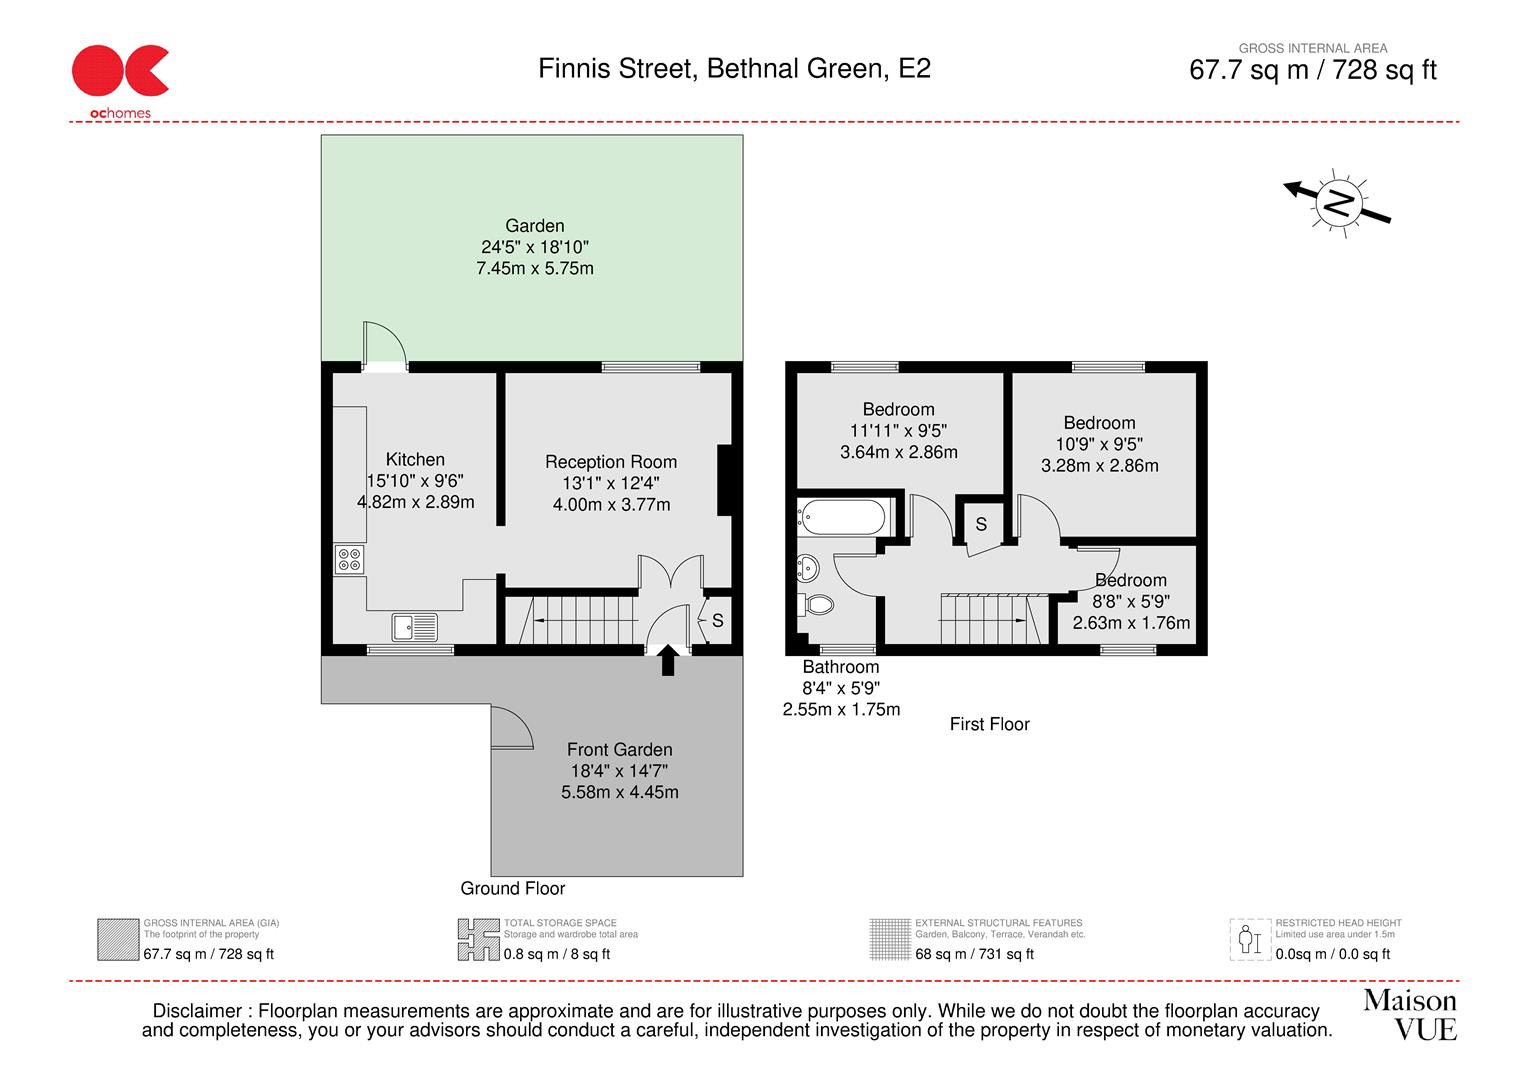 3 bed terraced house for sale in Finnis Street, Bethnal Green - Property floorplan